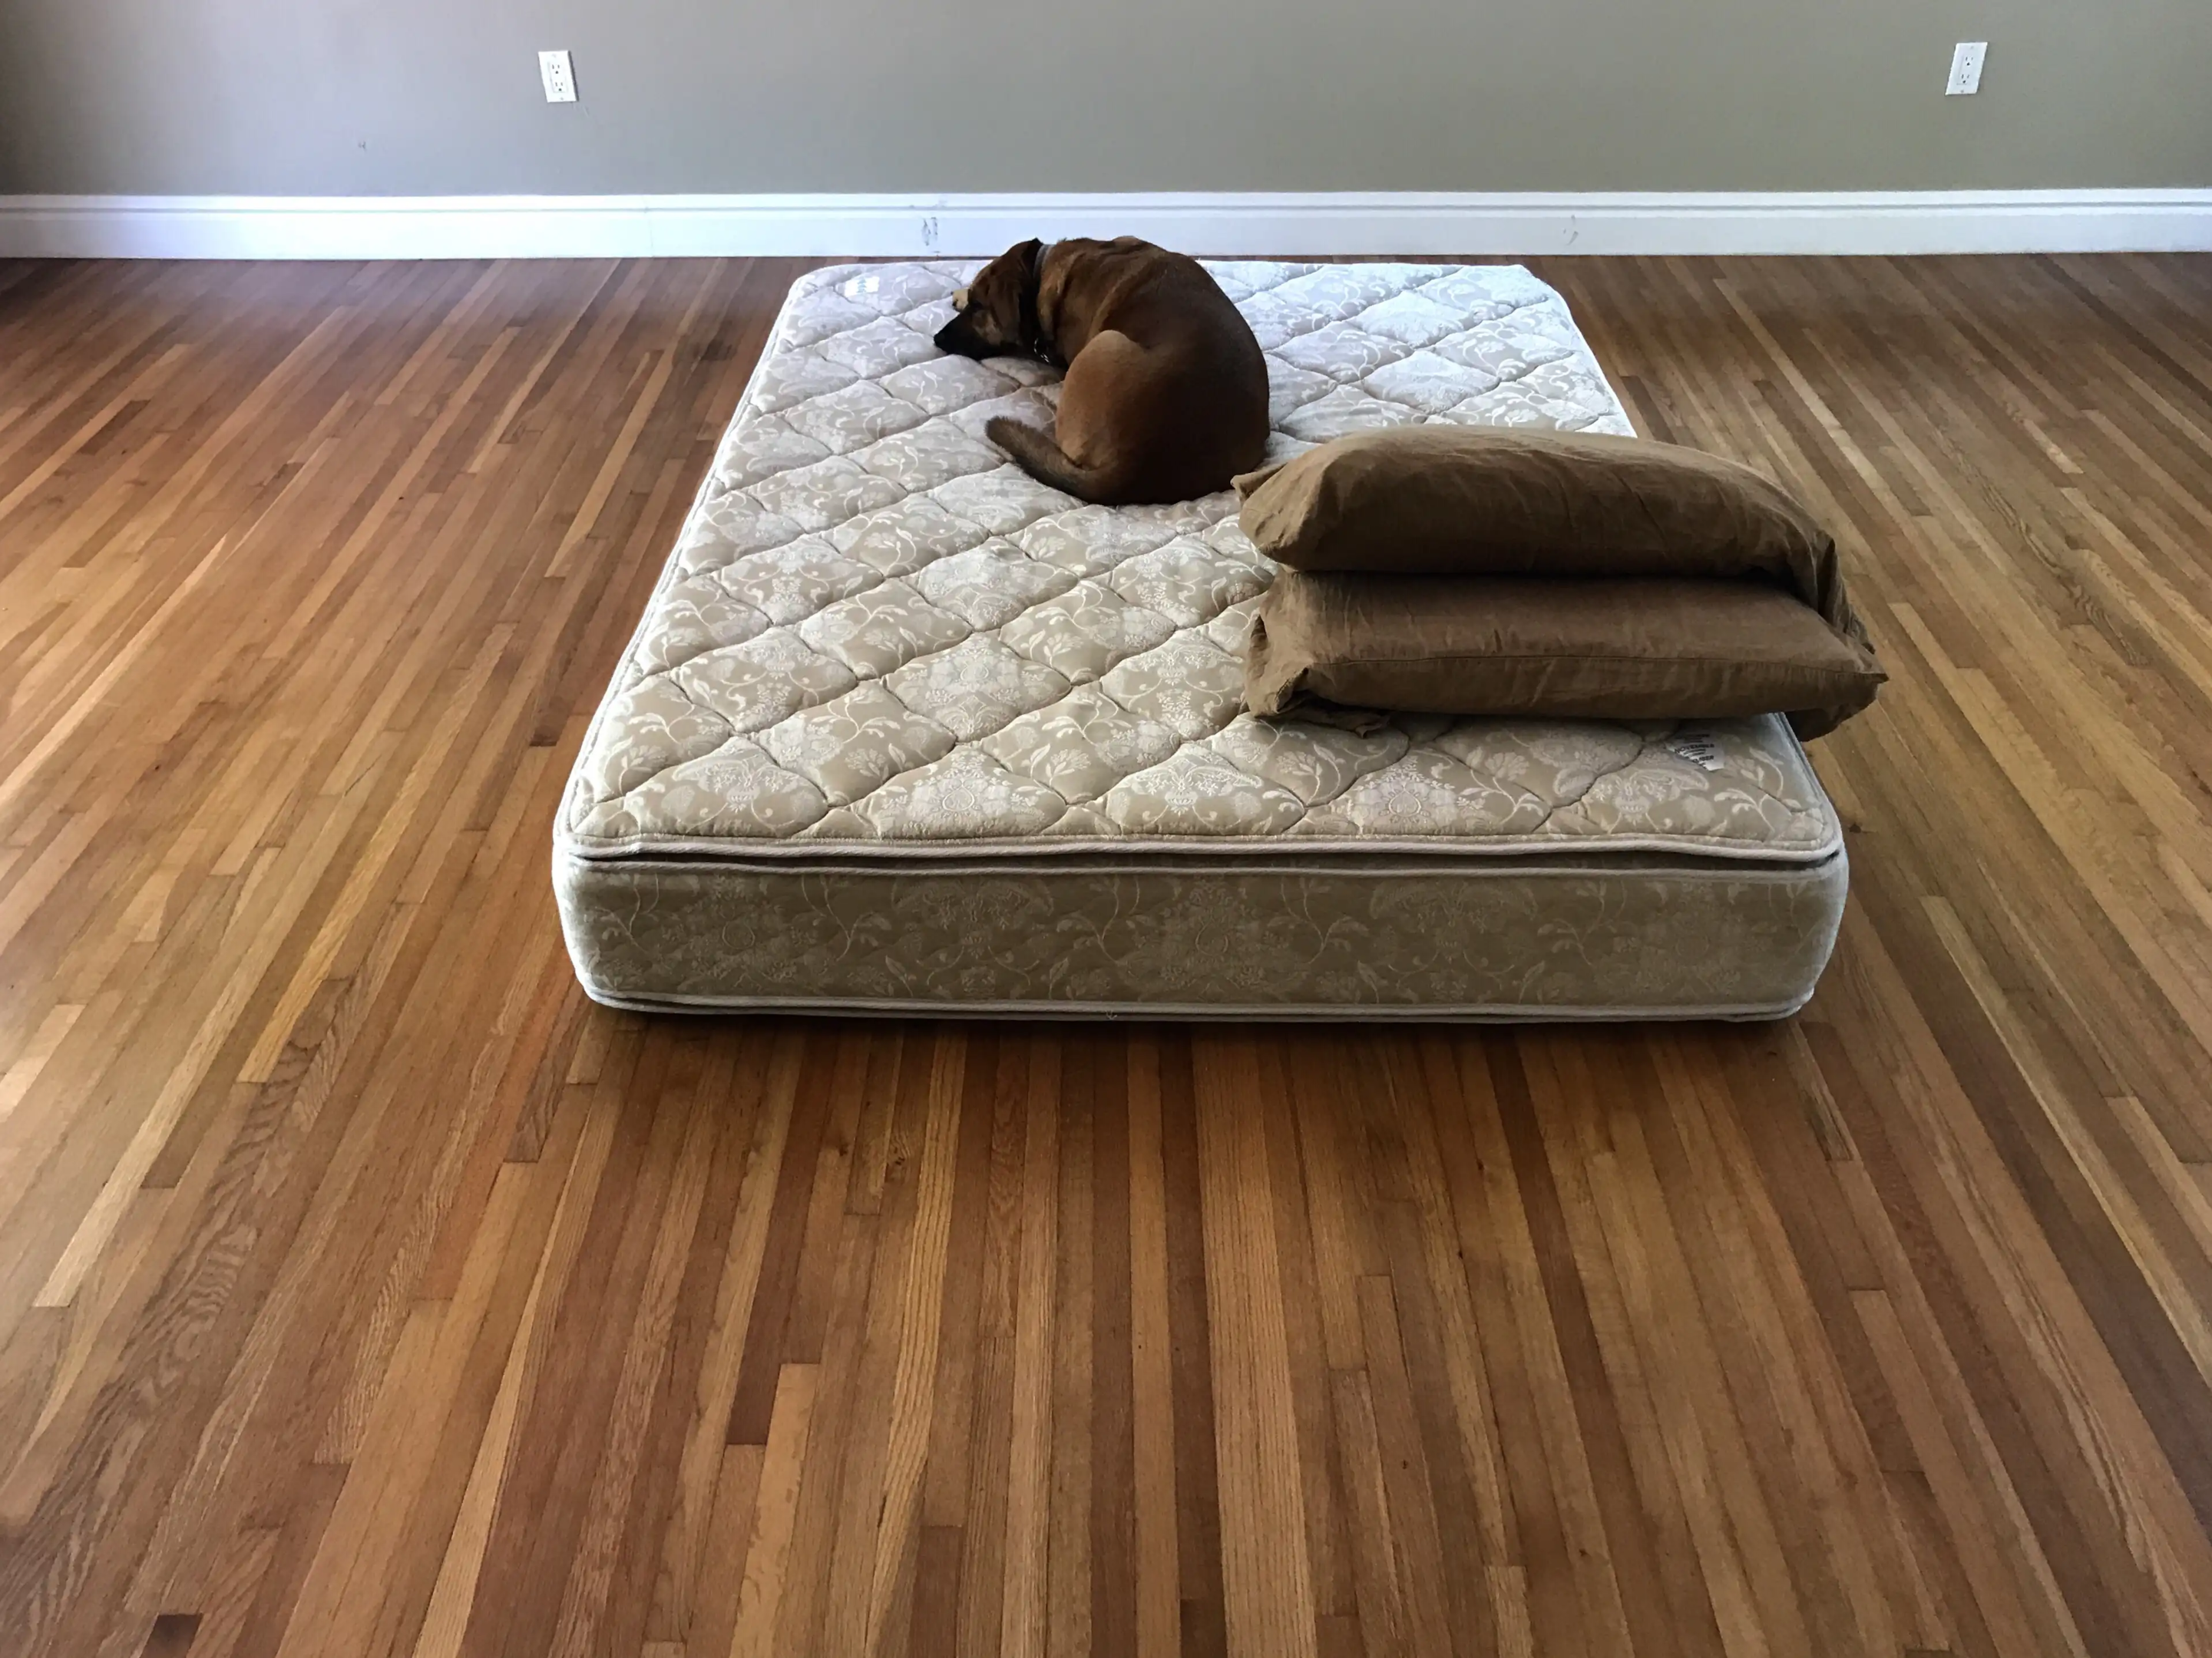 hypnotic-relaxation mattress for animals -hypnia gives comfort